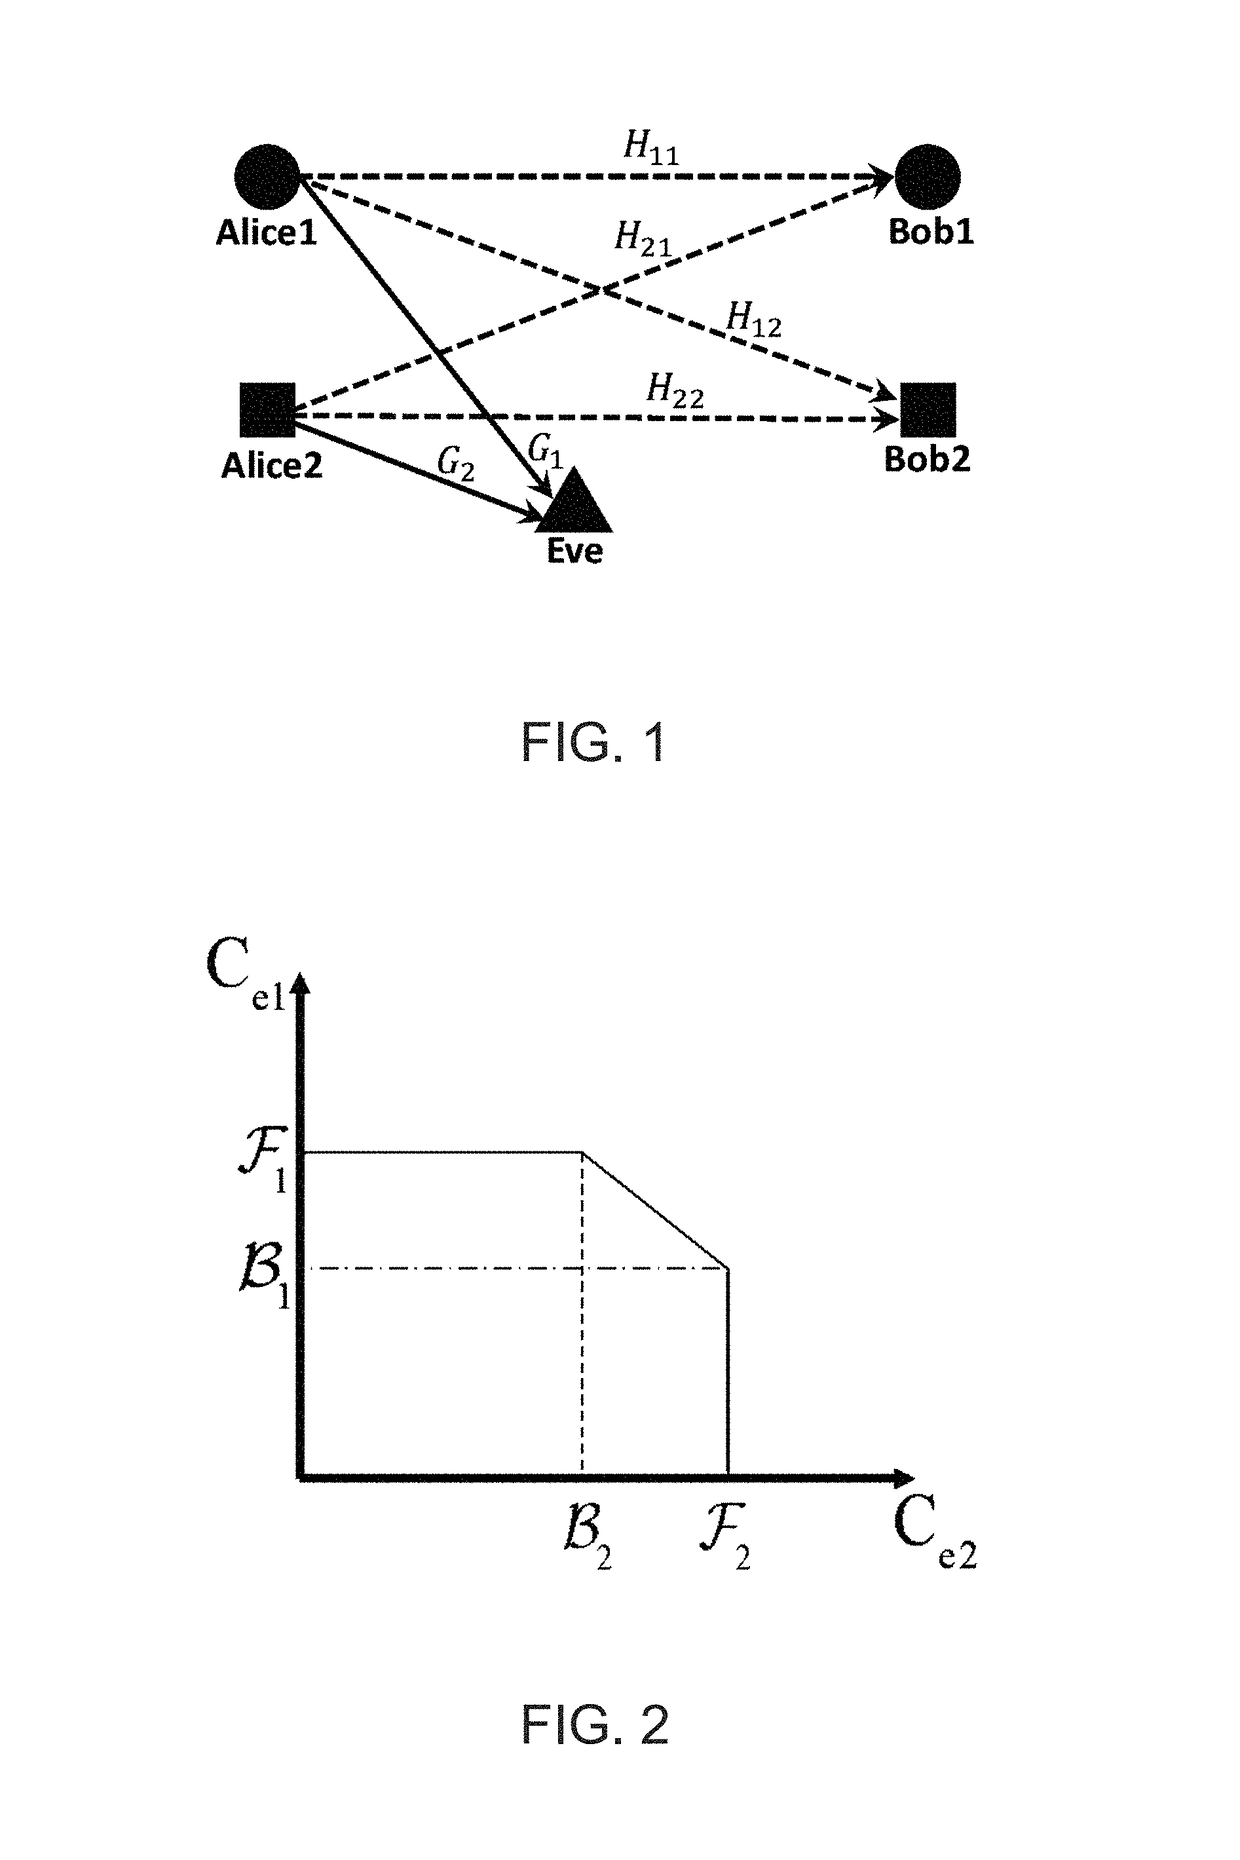 Systems and methods for securing wireless communications